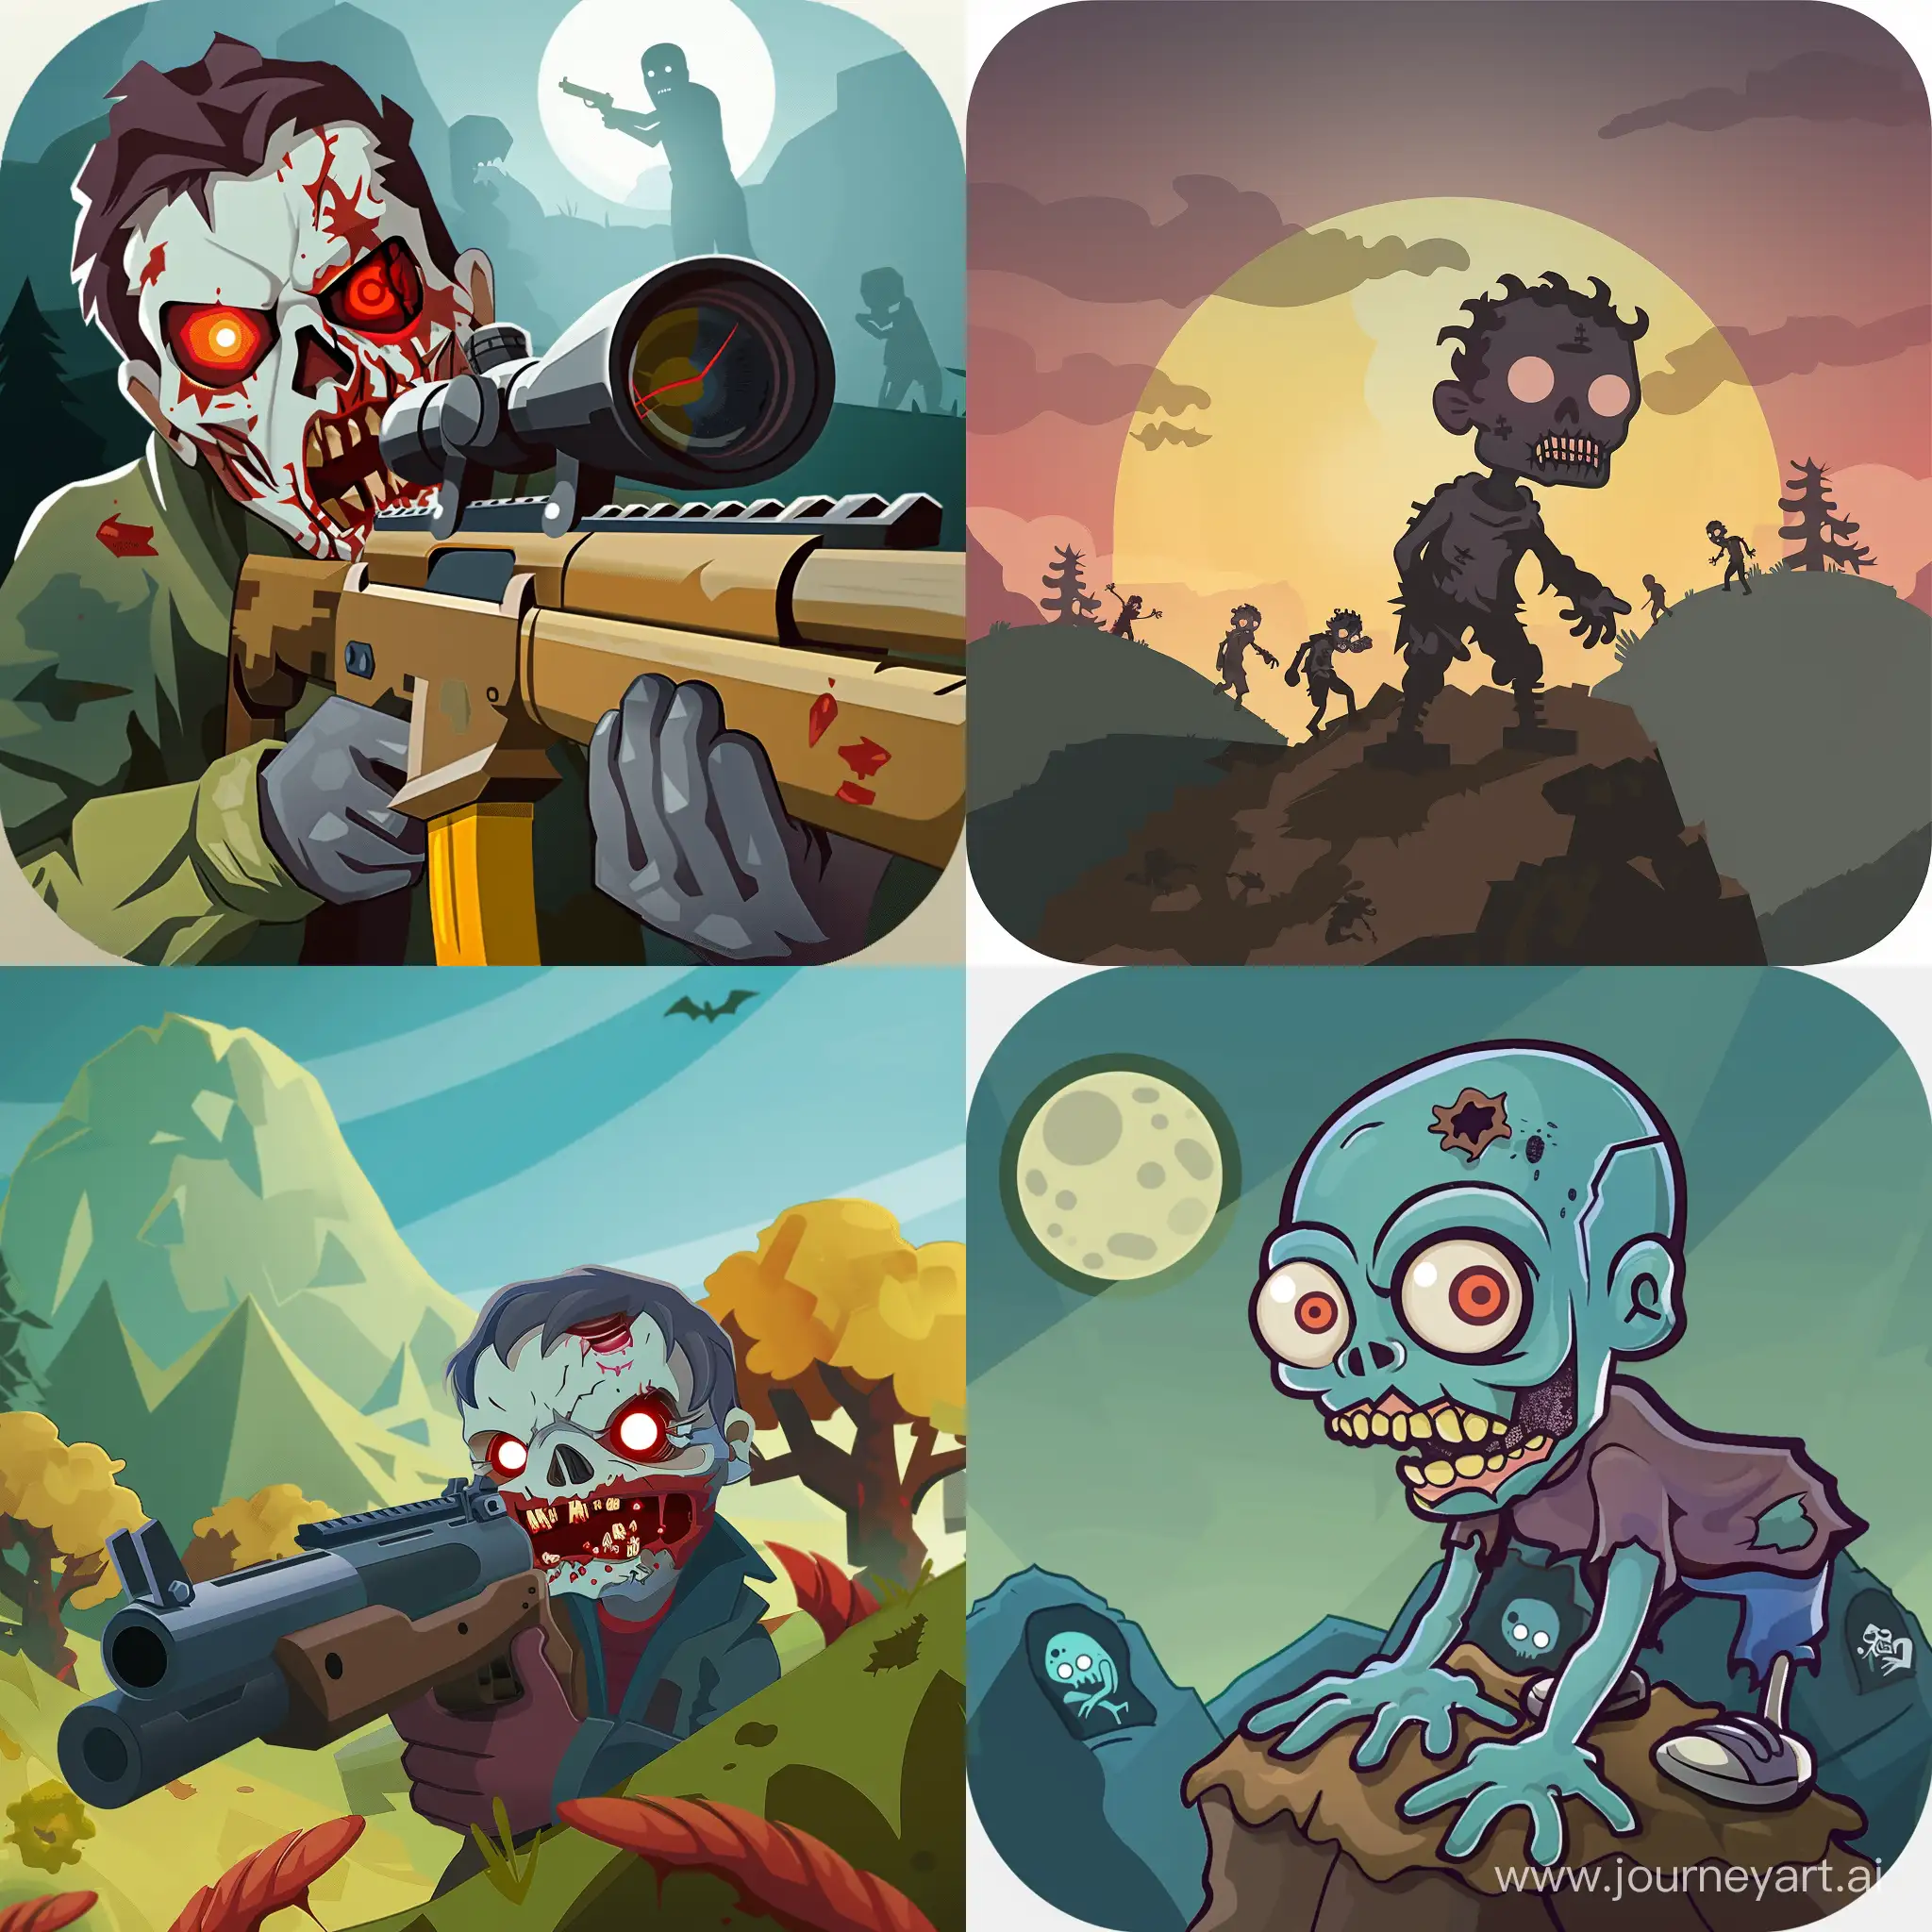 Zombie-Shooter-Game-in-Hillside-Setting